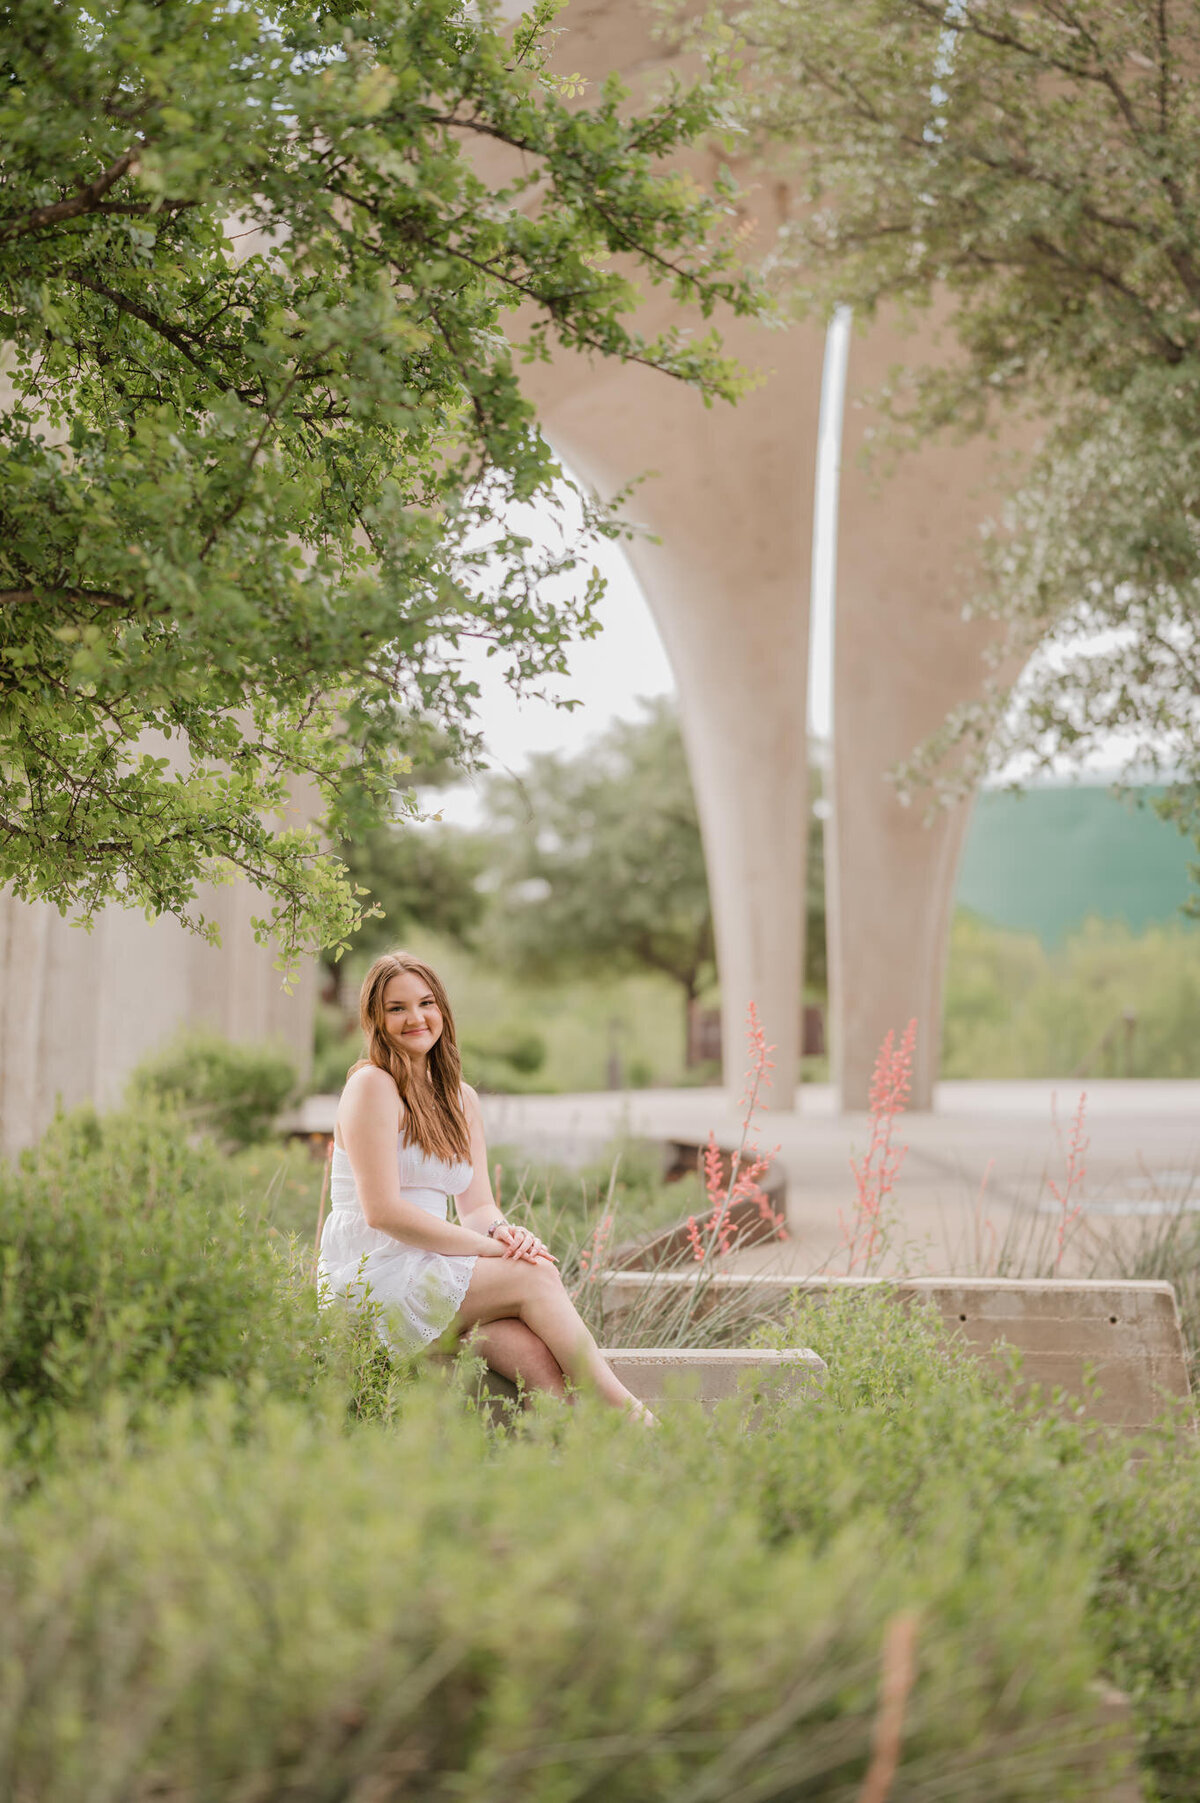 Senior picture of a girl in a white dress sitting surrounded by greenery with concrete arches in the background.